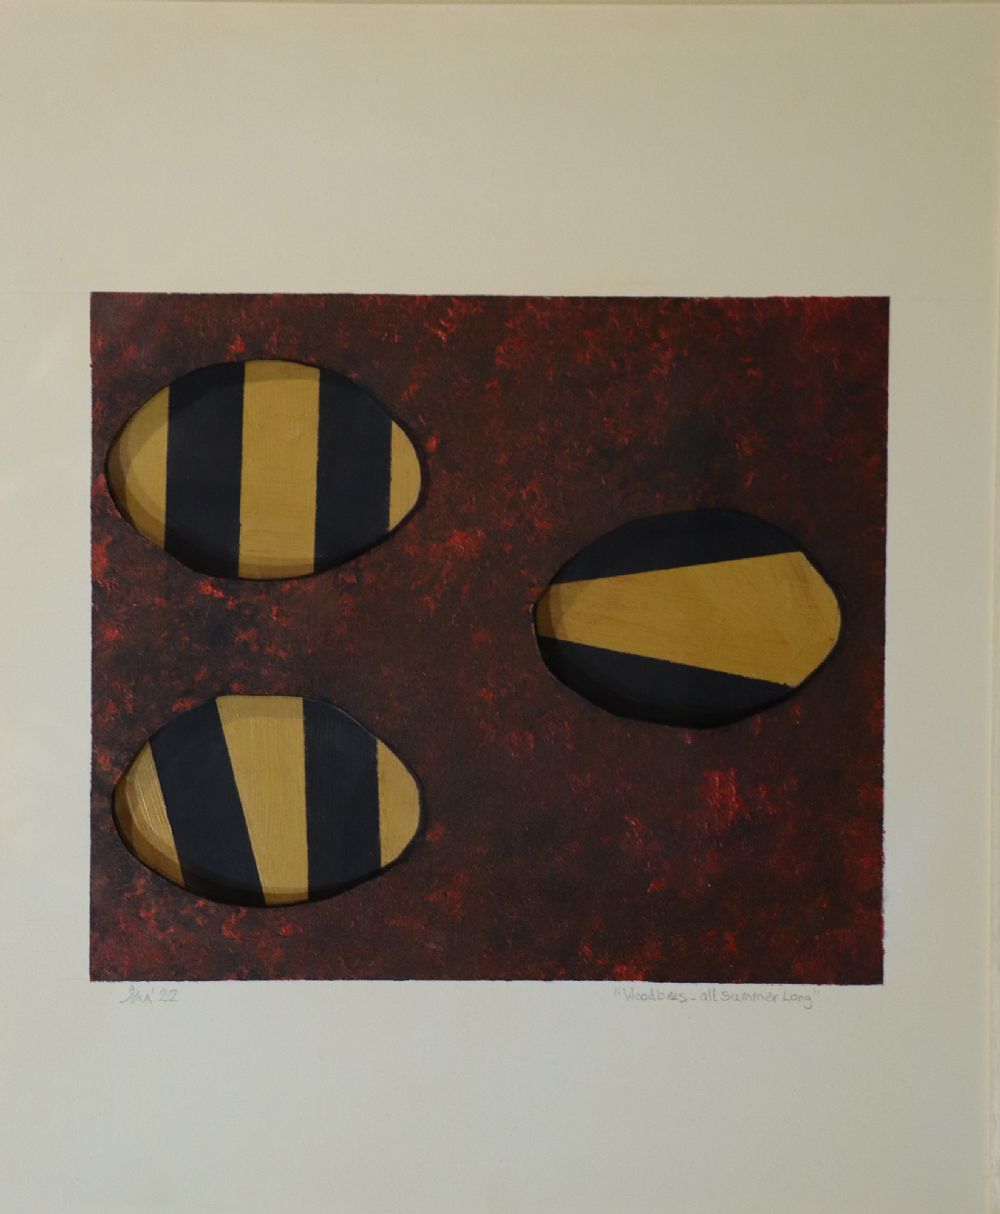 WOODBEES - ALL SUMMER LONG by Stephen McKee sold for €440 at deVeres Auctions